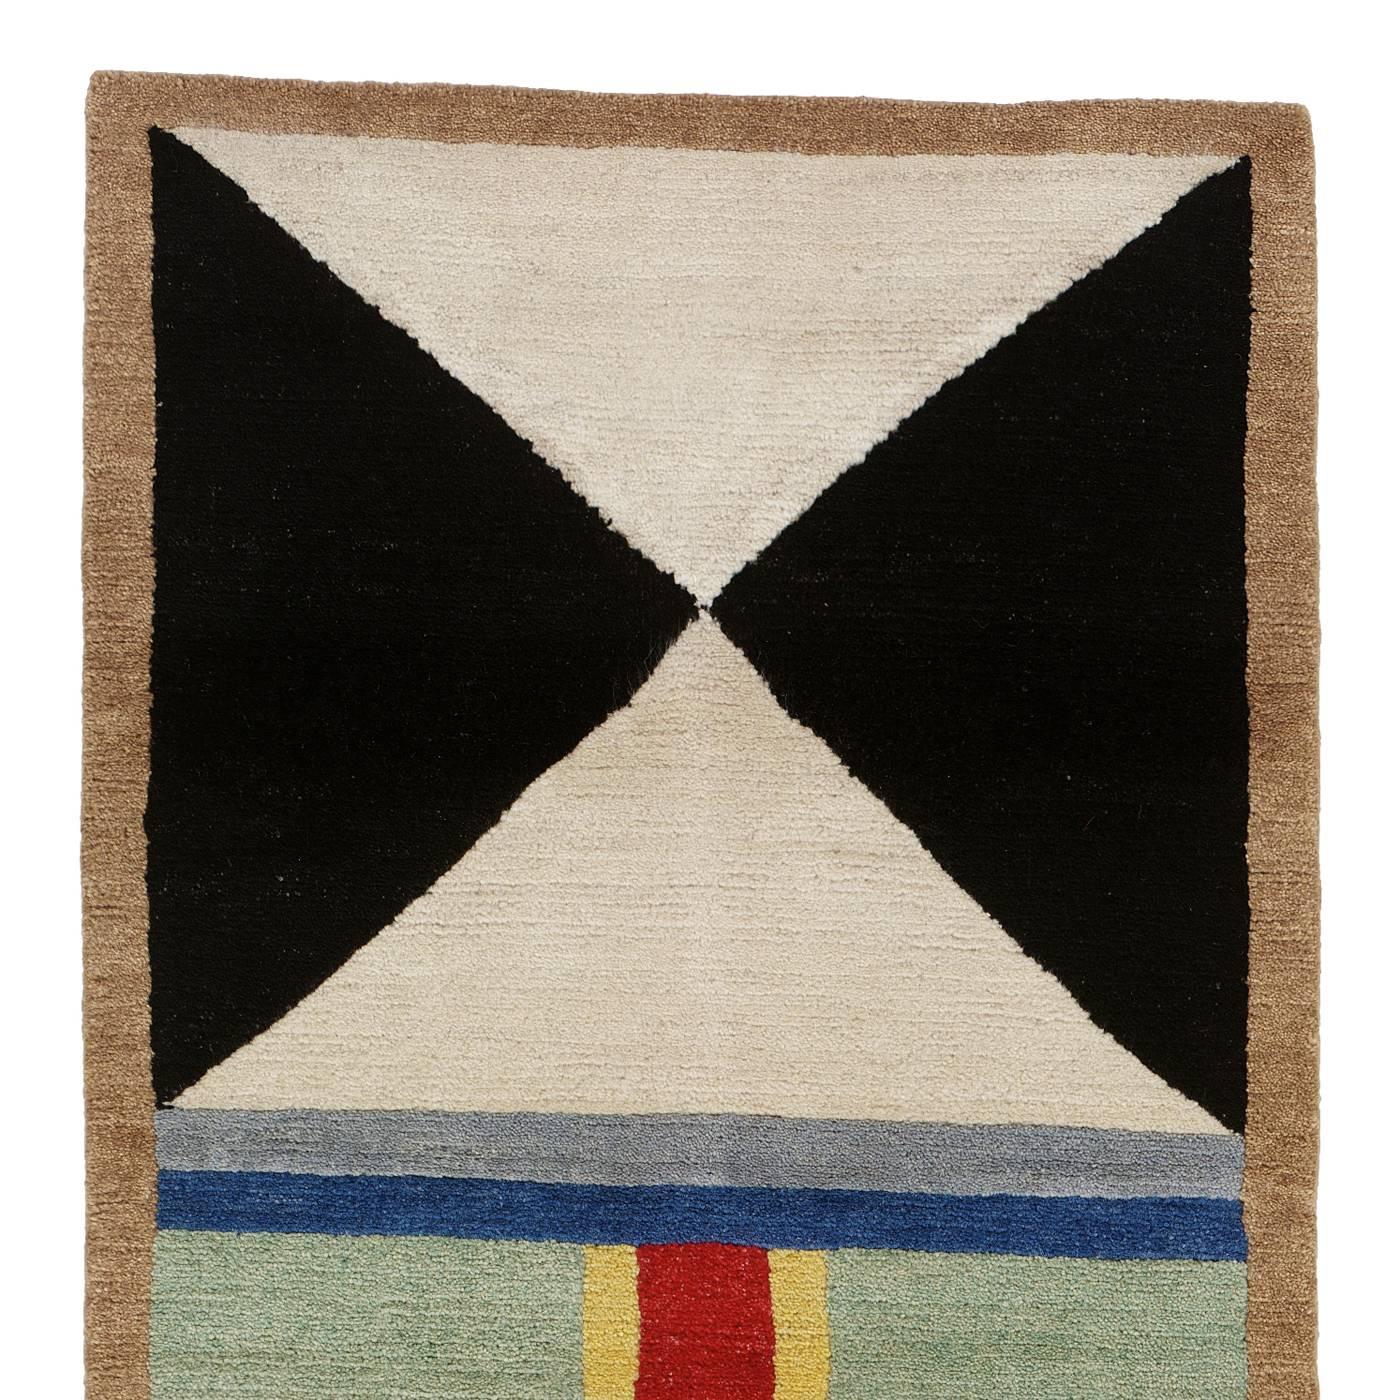 Striking and modern, this exquisite carpet will add color and a bold series of decorative patterns to enhance the look of any contemporary home. This piece is part of a limited series of 36, signed by designer Nathalie Du Pasquier and hand made by